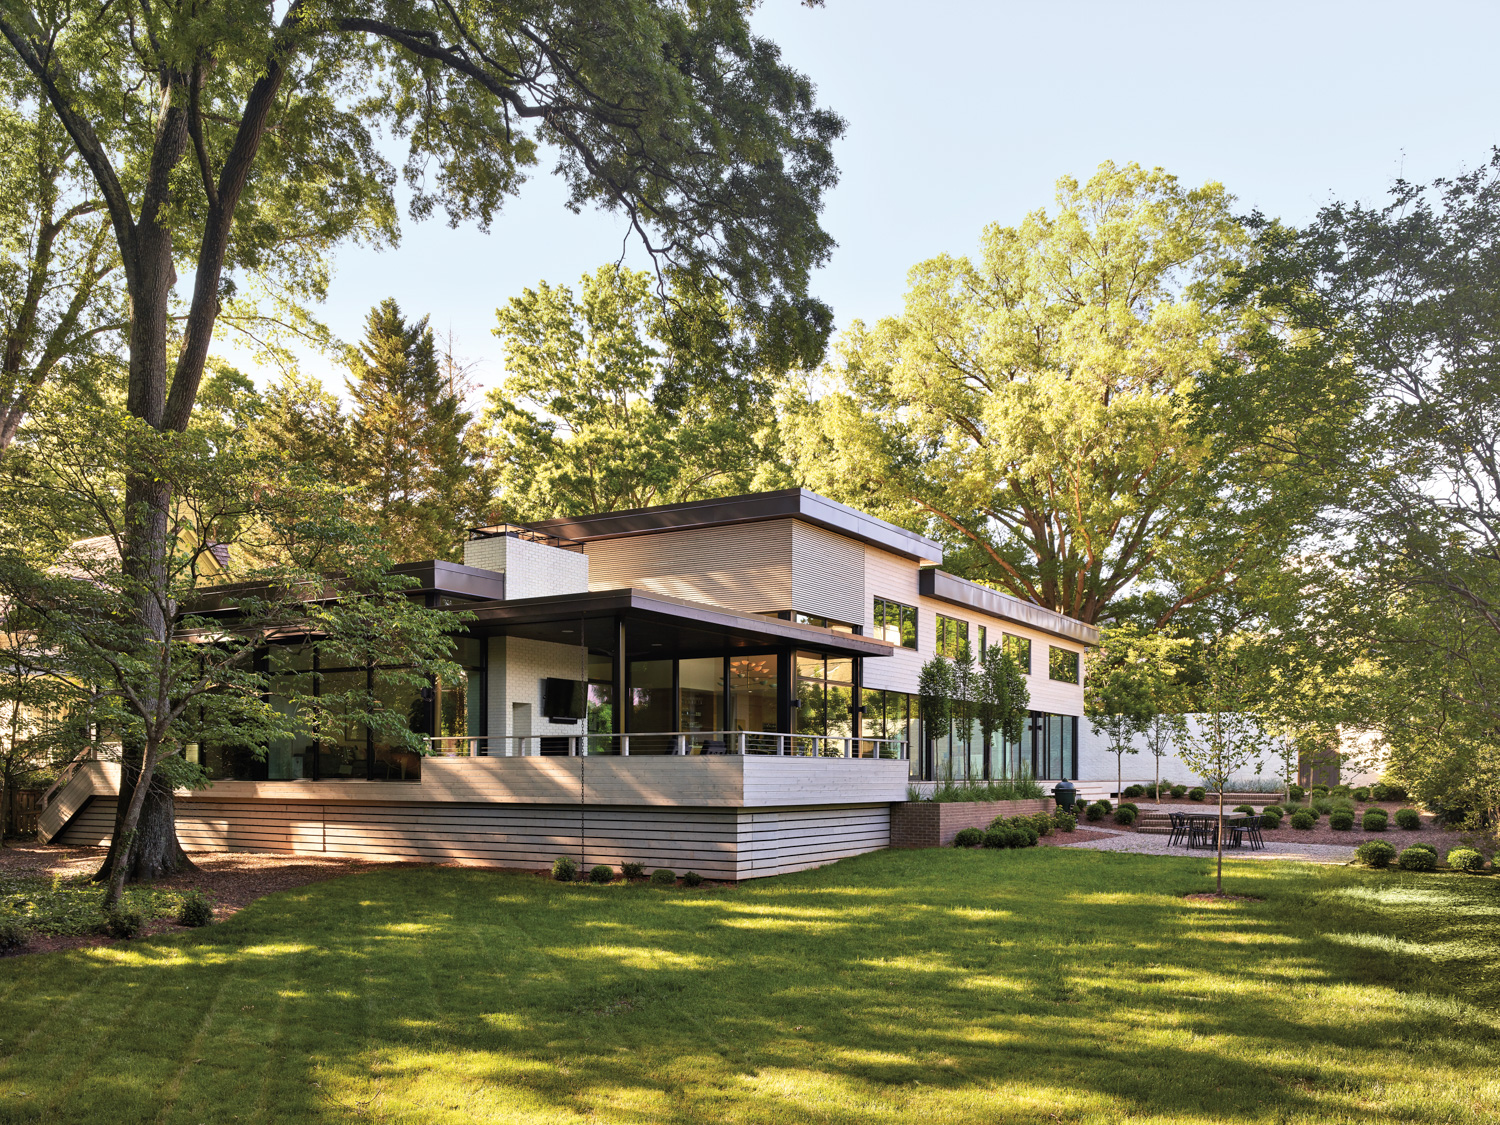 Midcentury modern house with large lawn and mature trees